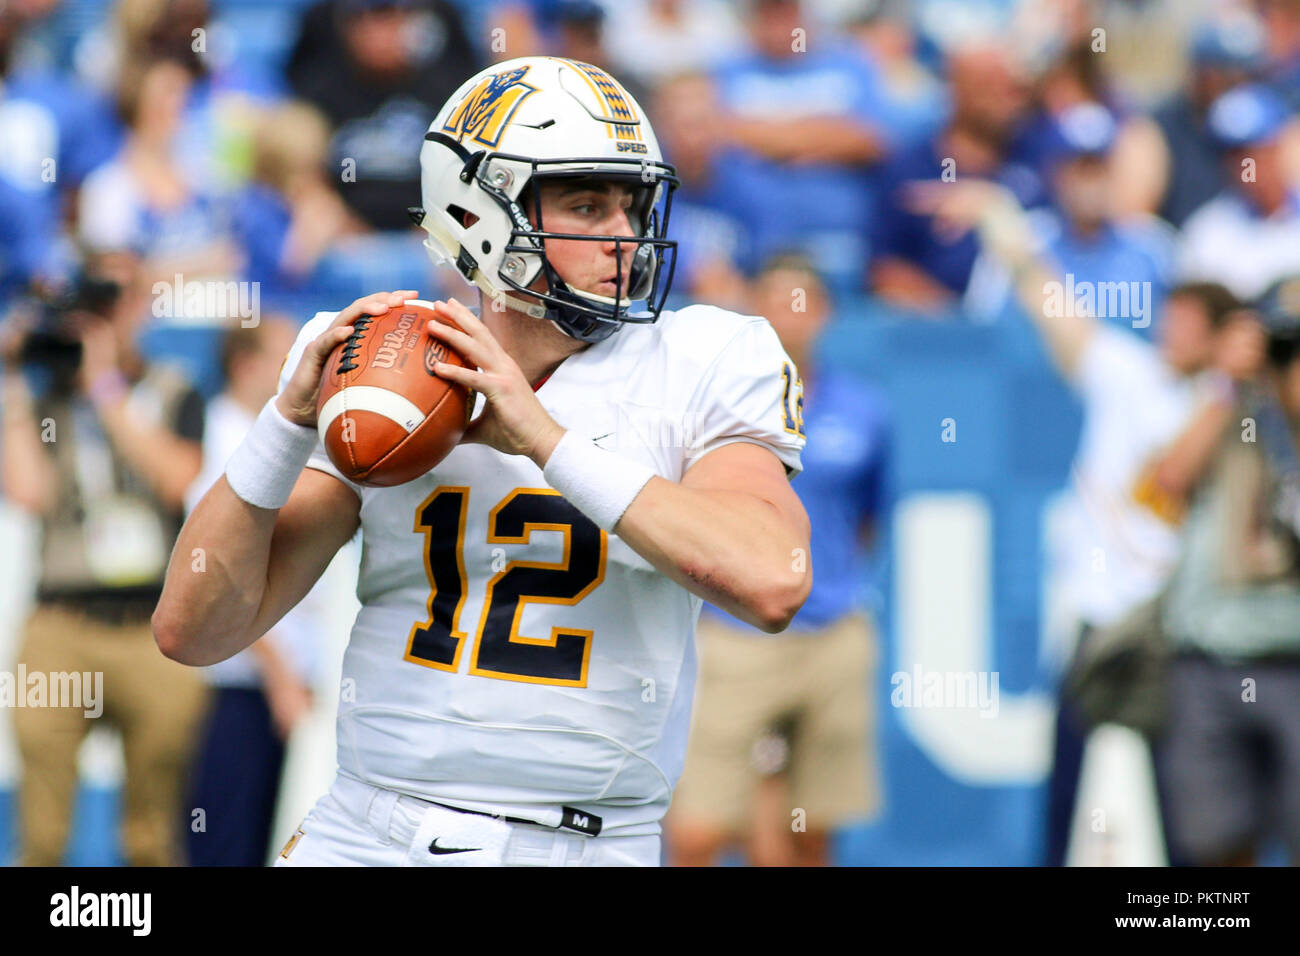 Lexington, Kentucky, USA. 15th Sep, 2018. Murray State Racers QB Drew Anderson prepares to throw during an NCAA football game between the Kentucky Wildcats and the Murray State Racers at Kroger Field in Lexington, Kentucky. Kevin Schultz/CSM/Alamy Live News Stock Photo